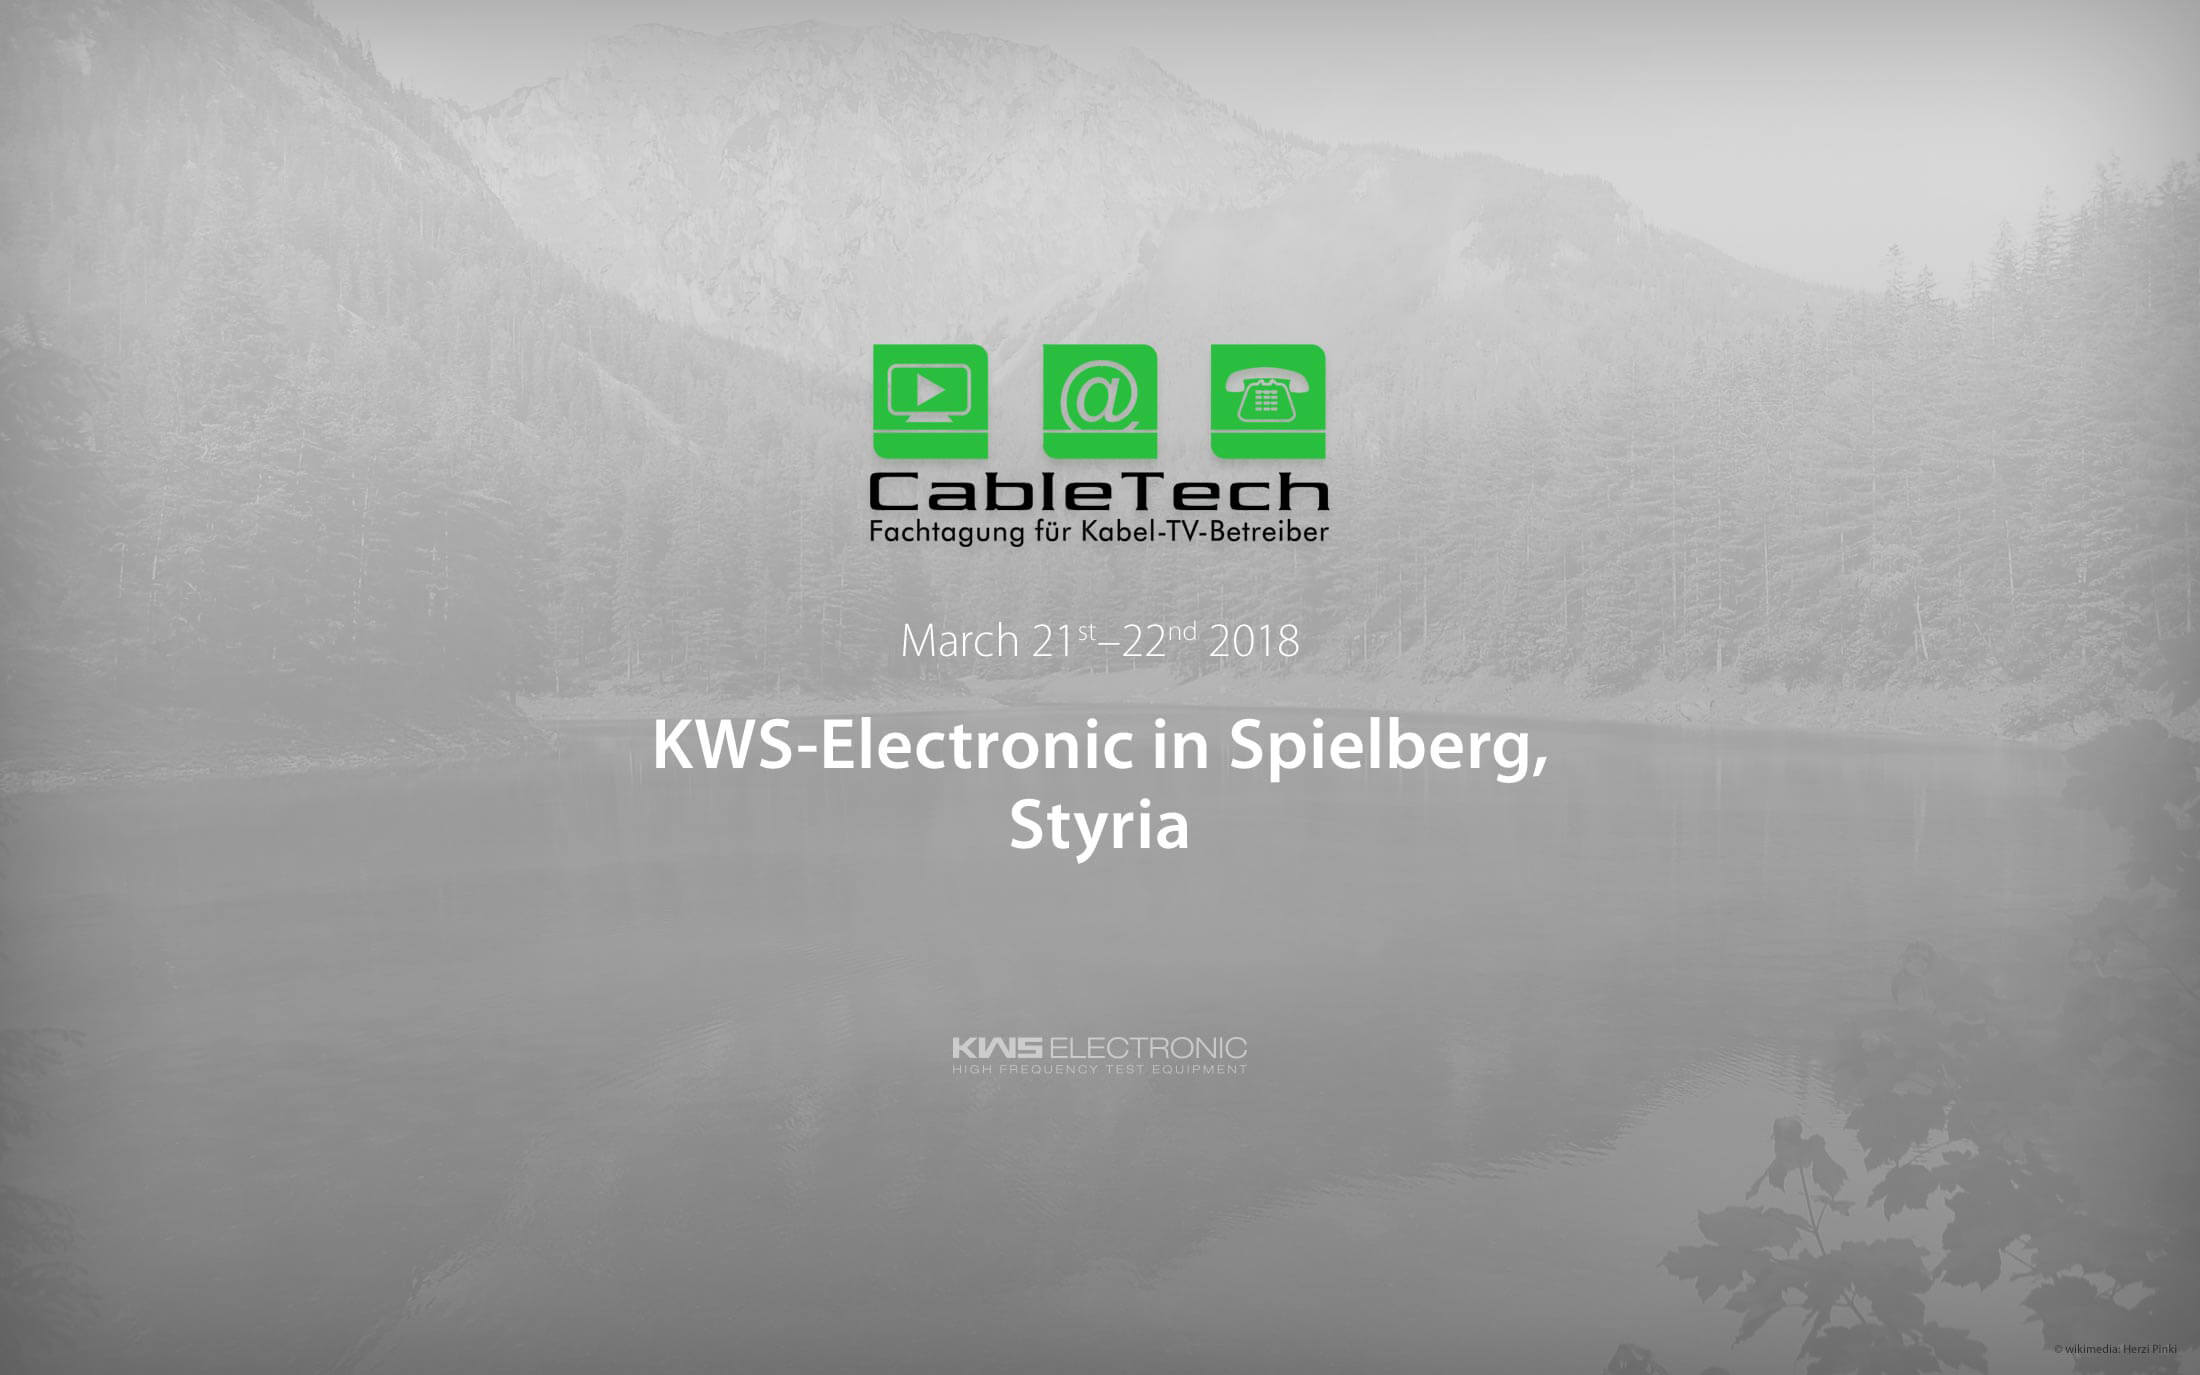 KWS Electronic News 2018: CableTech in Spielberg Austria